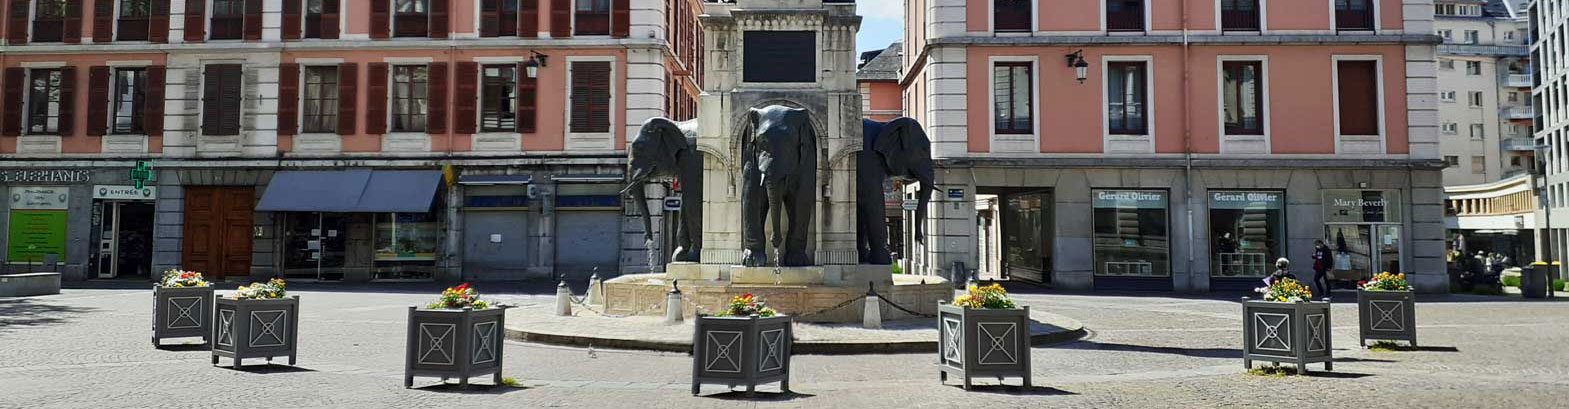 Chambéry taxis at Place des Elephants